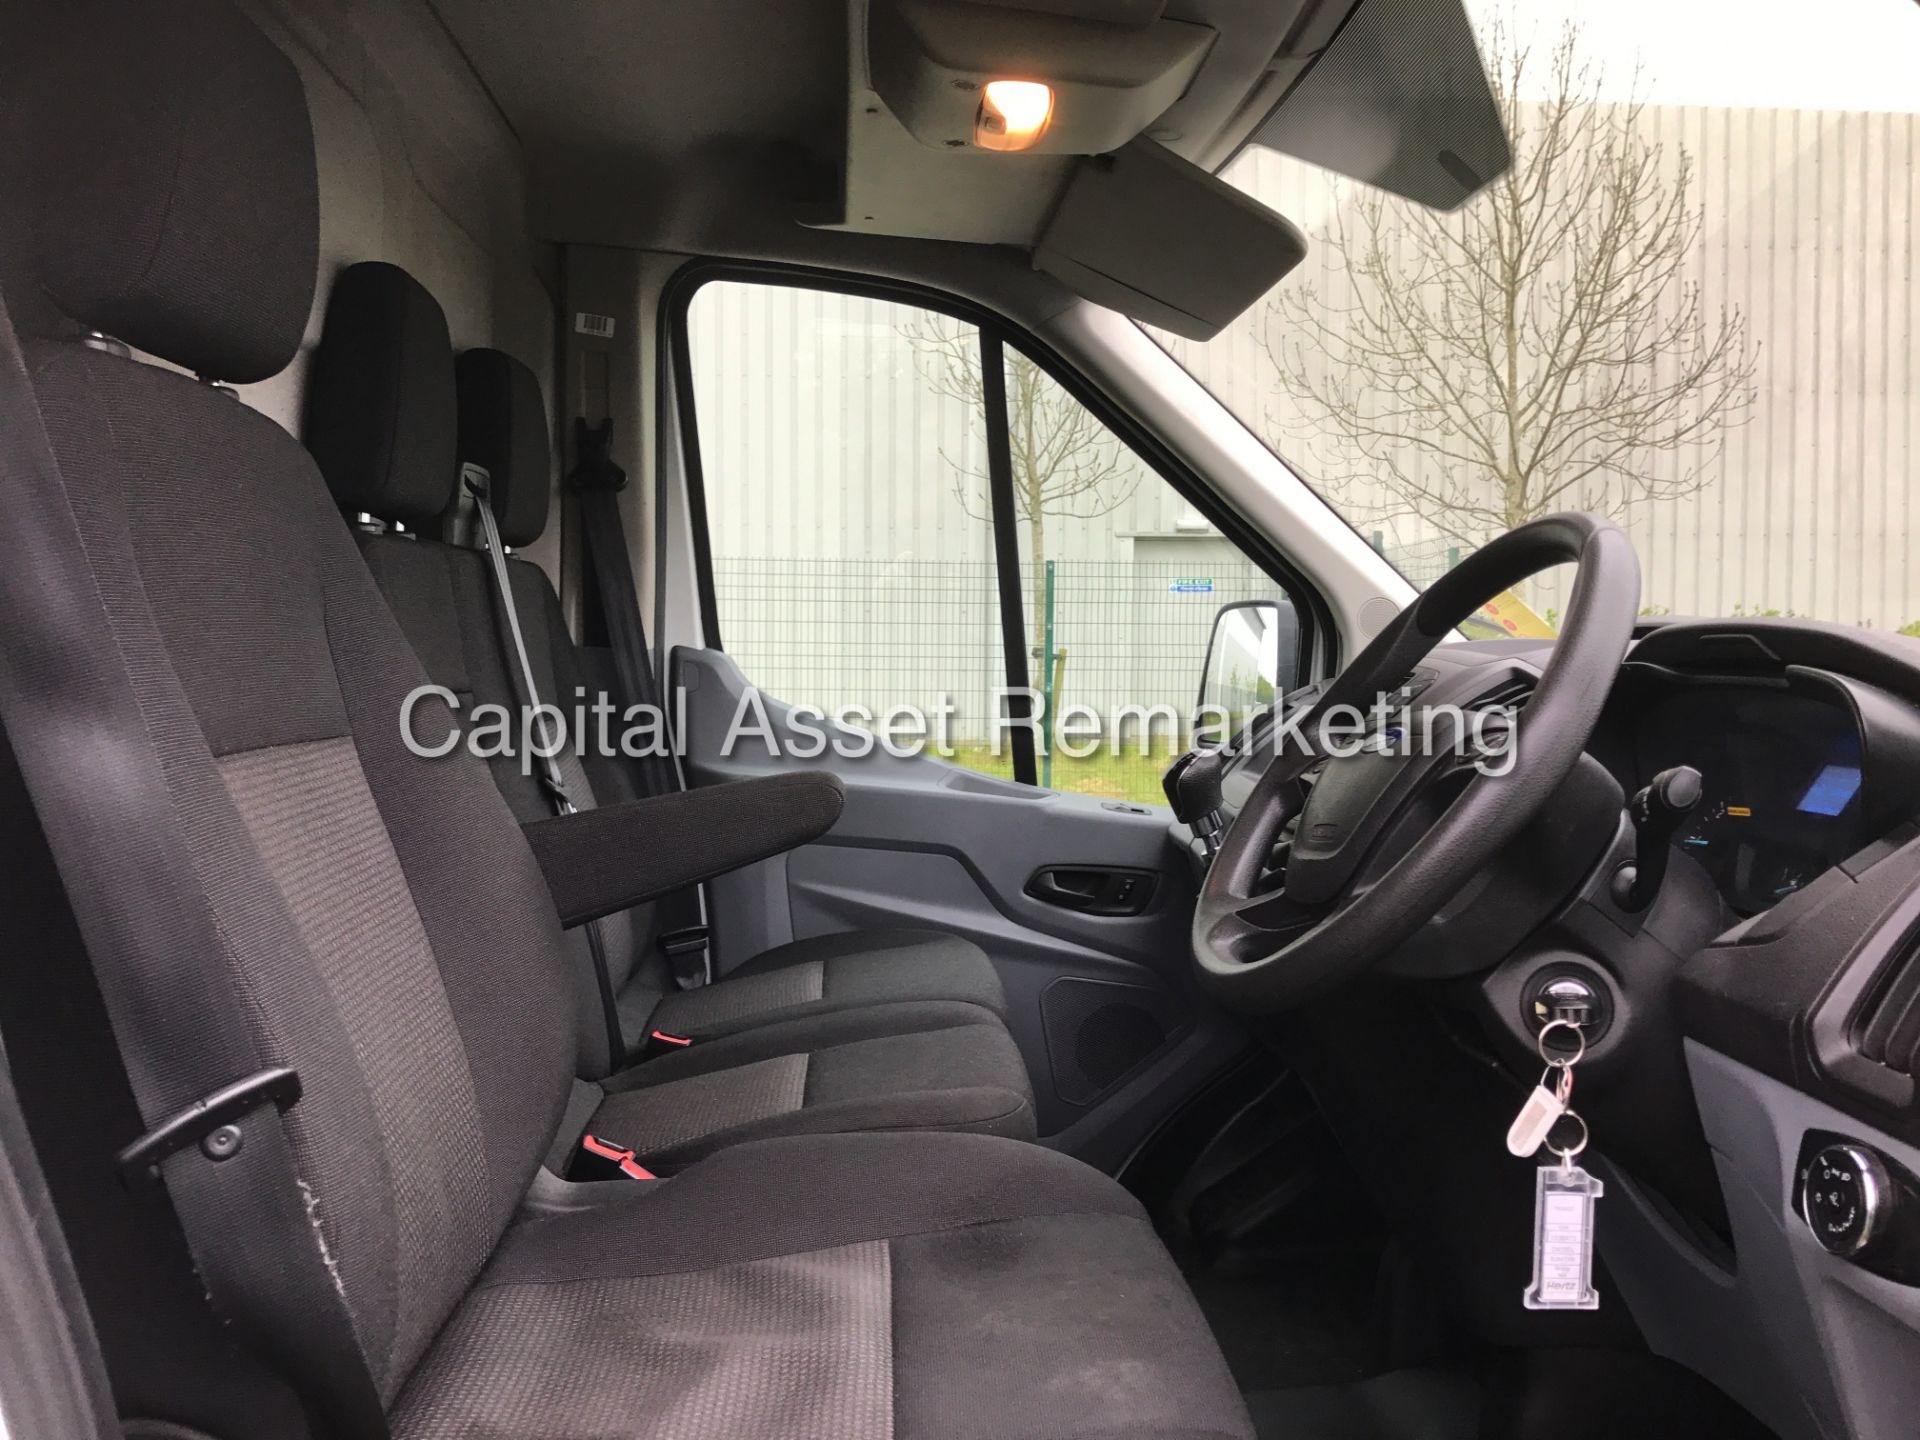 (ON SALE) FORD TRANSIT 2.2TDCI "125BHP - 6 SPEED" 350 LONG WHEEL BASE/ HIGH ROOF "NEW SHAPE" - Image 5 of 10